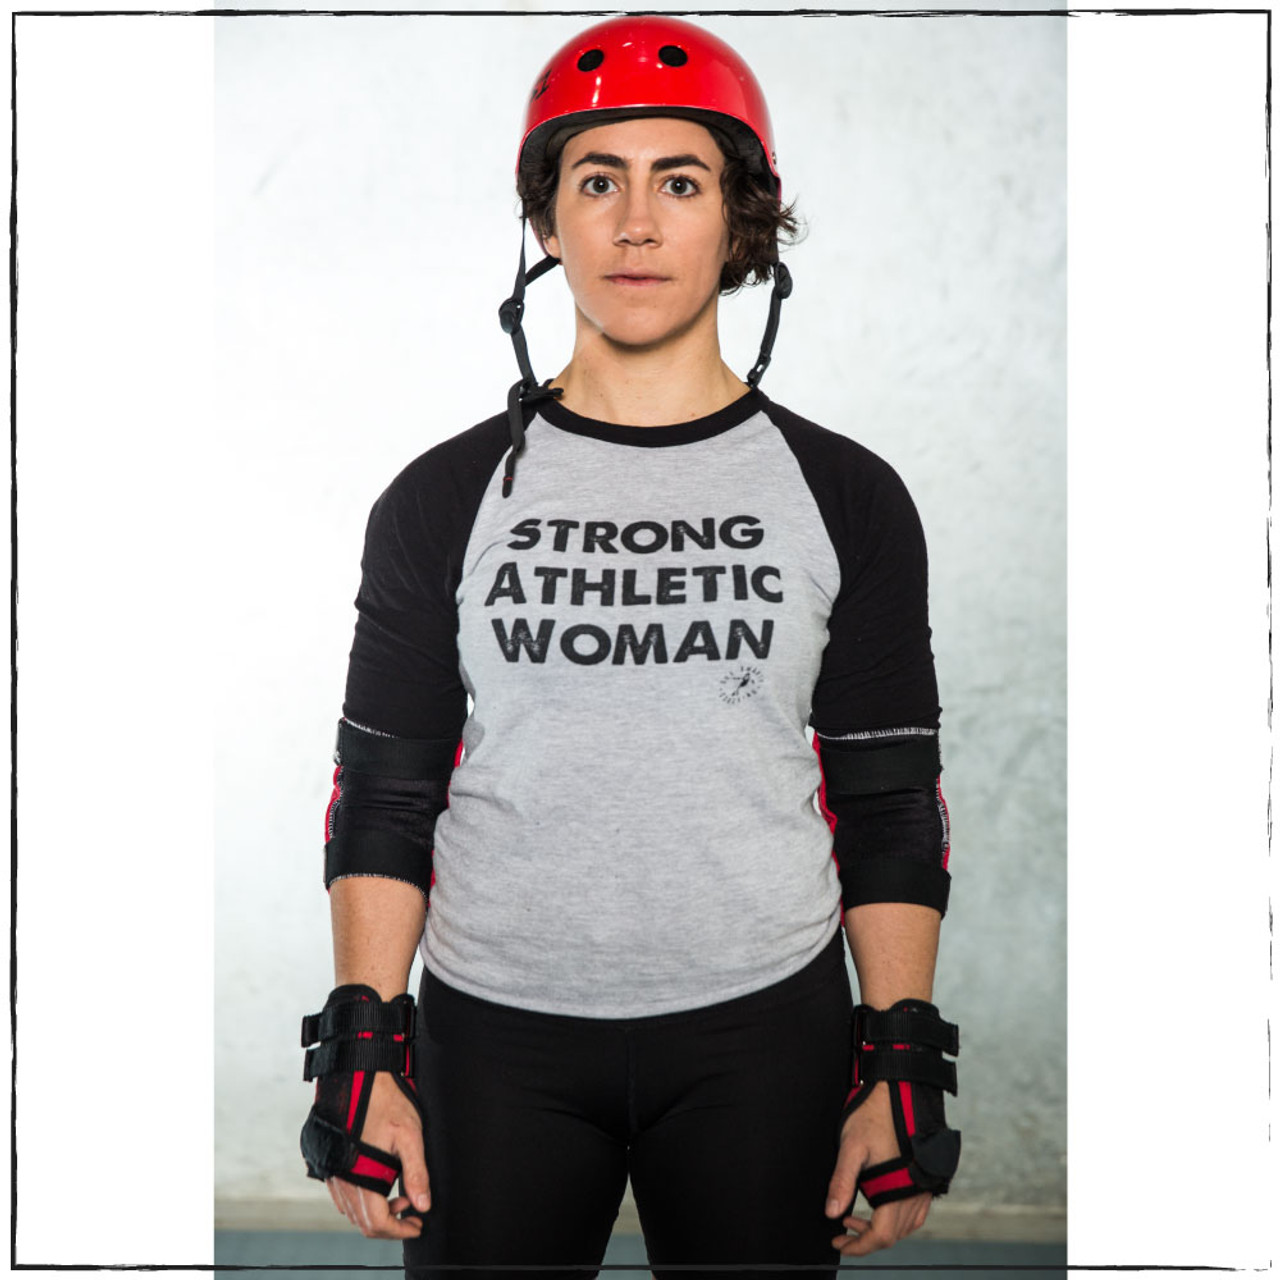 Shirts for Women in Sports: the Strong Athletic Woman Baseball Tee